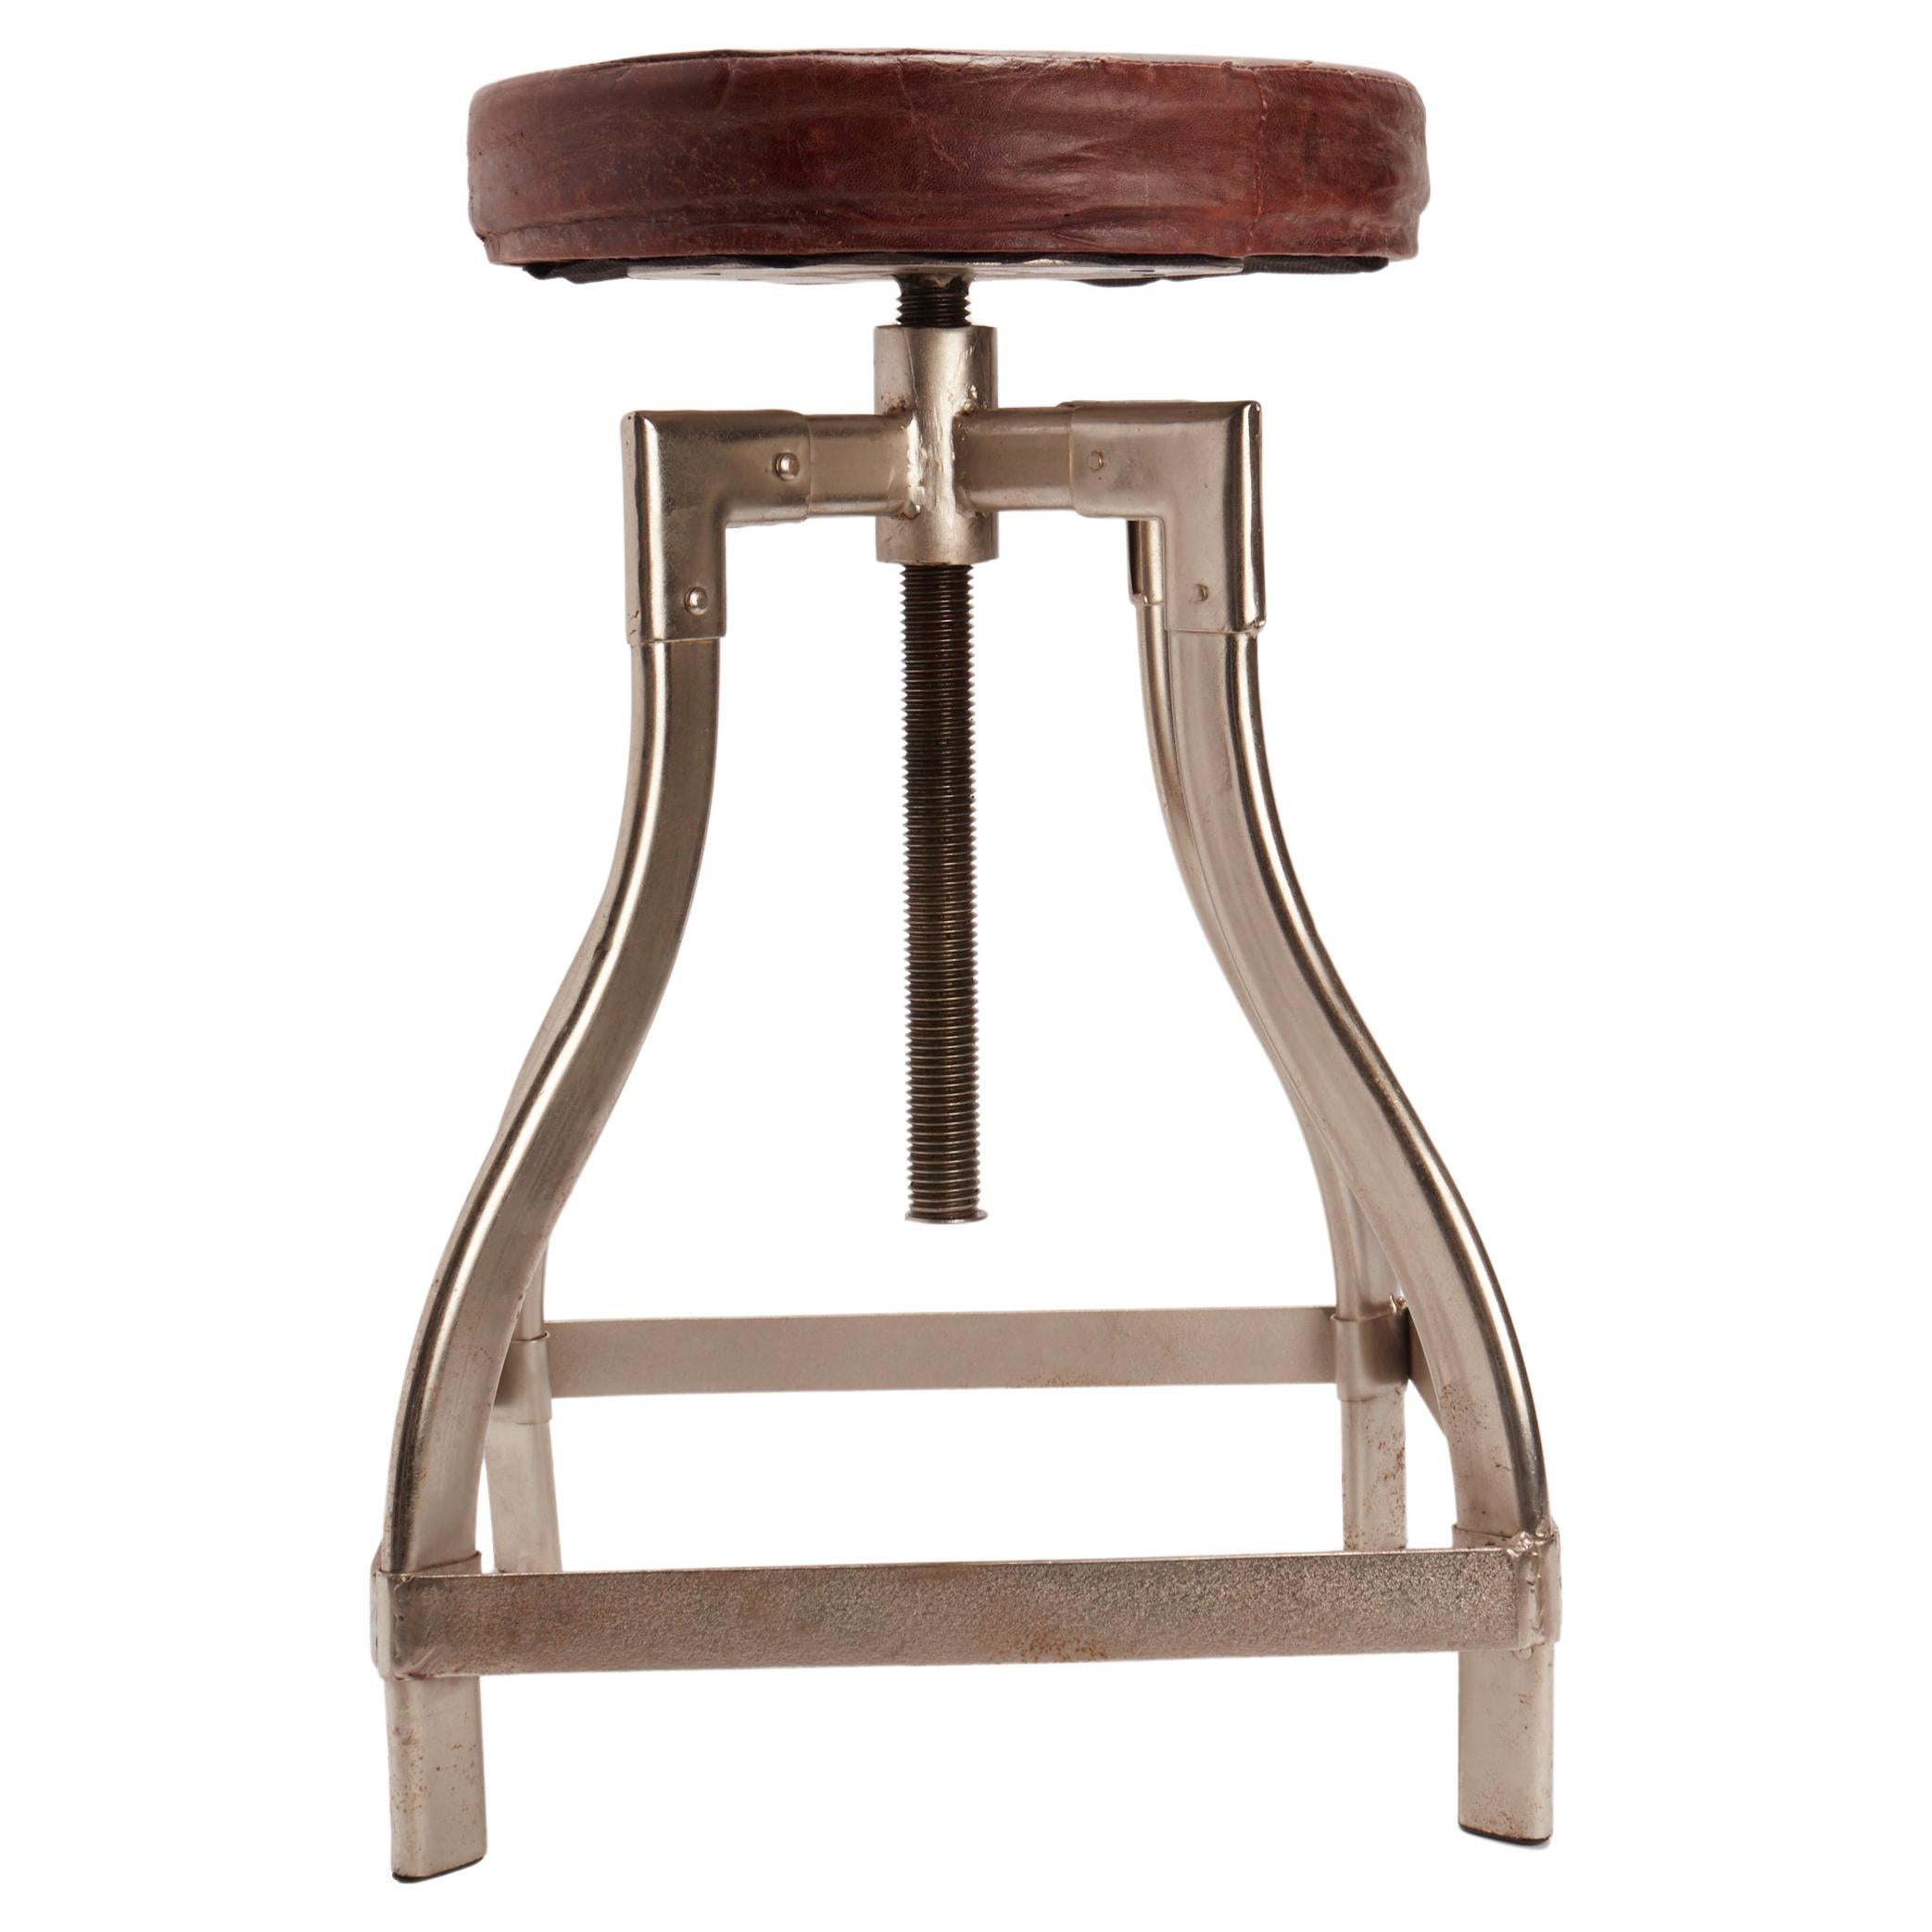 Chromed Metal Stool with Leather Top, USA, 1930 For Sale